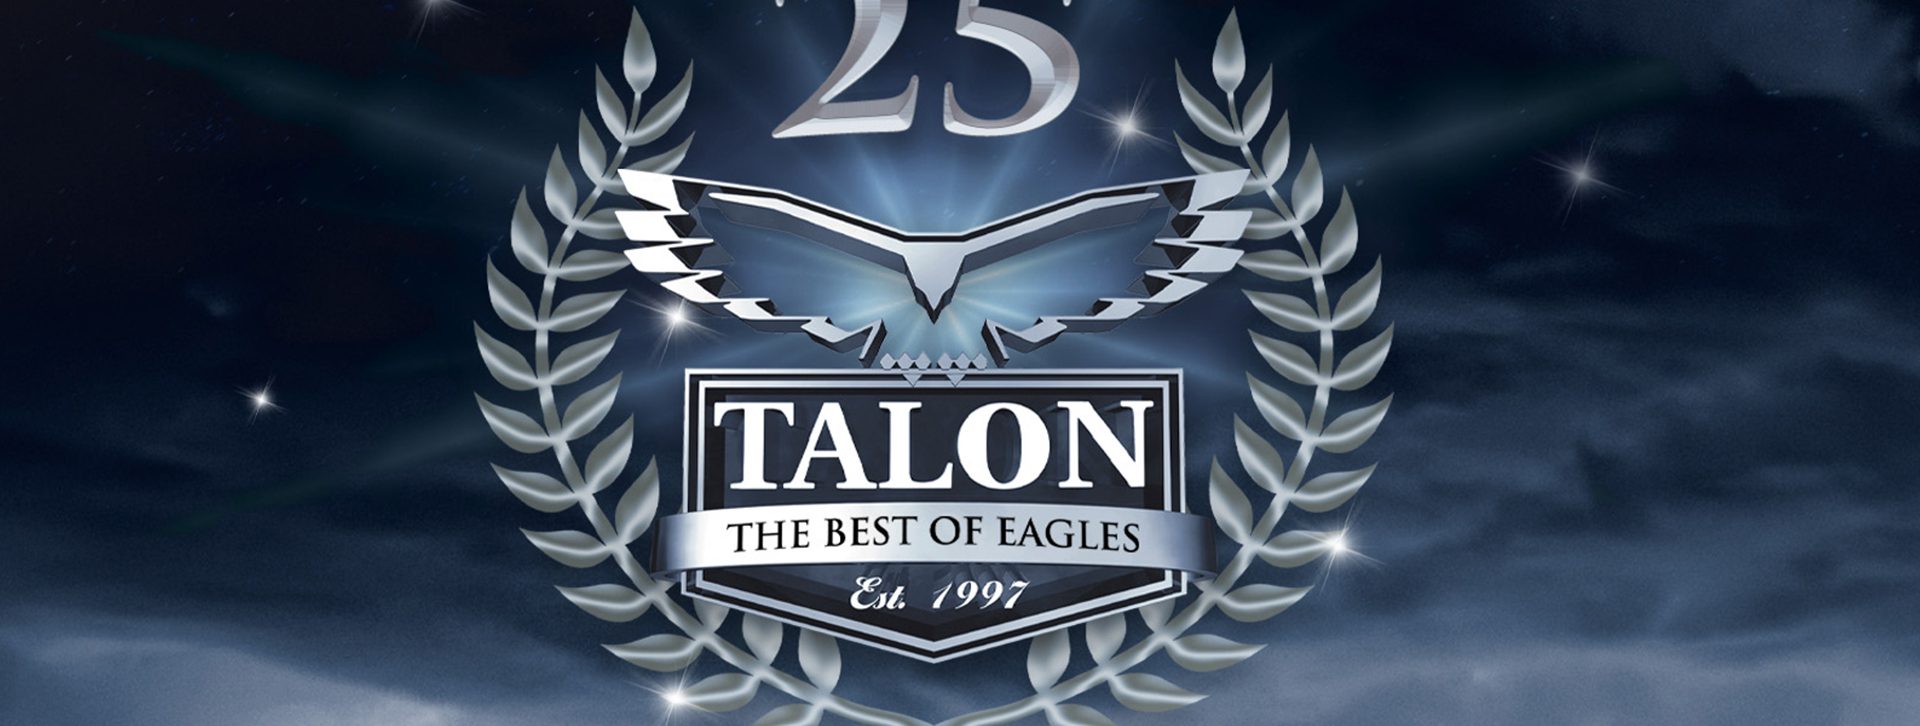 Talon: The Best of Eagles &#8211; 25th Anniversary Tour